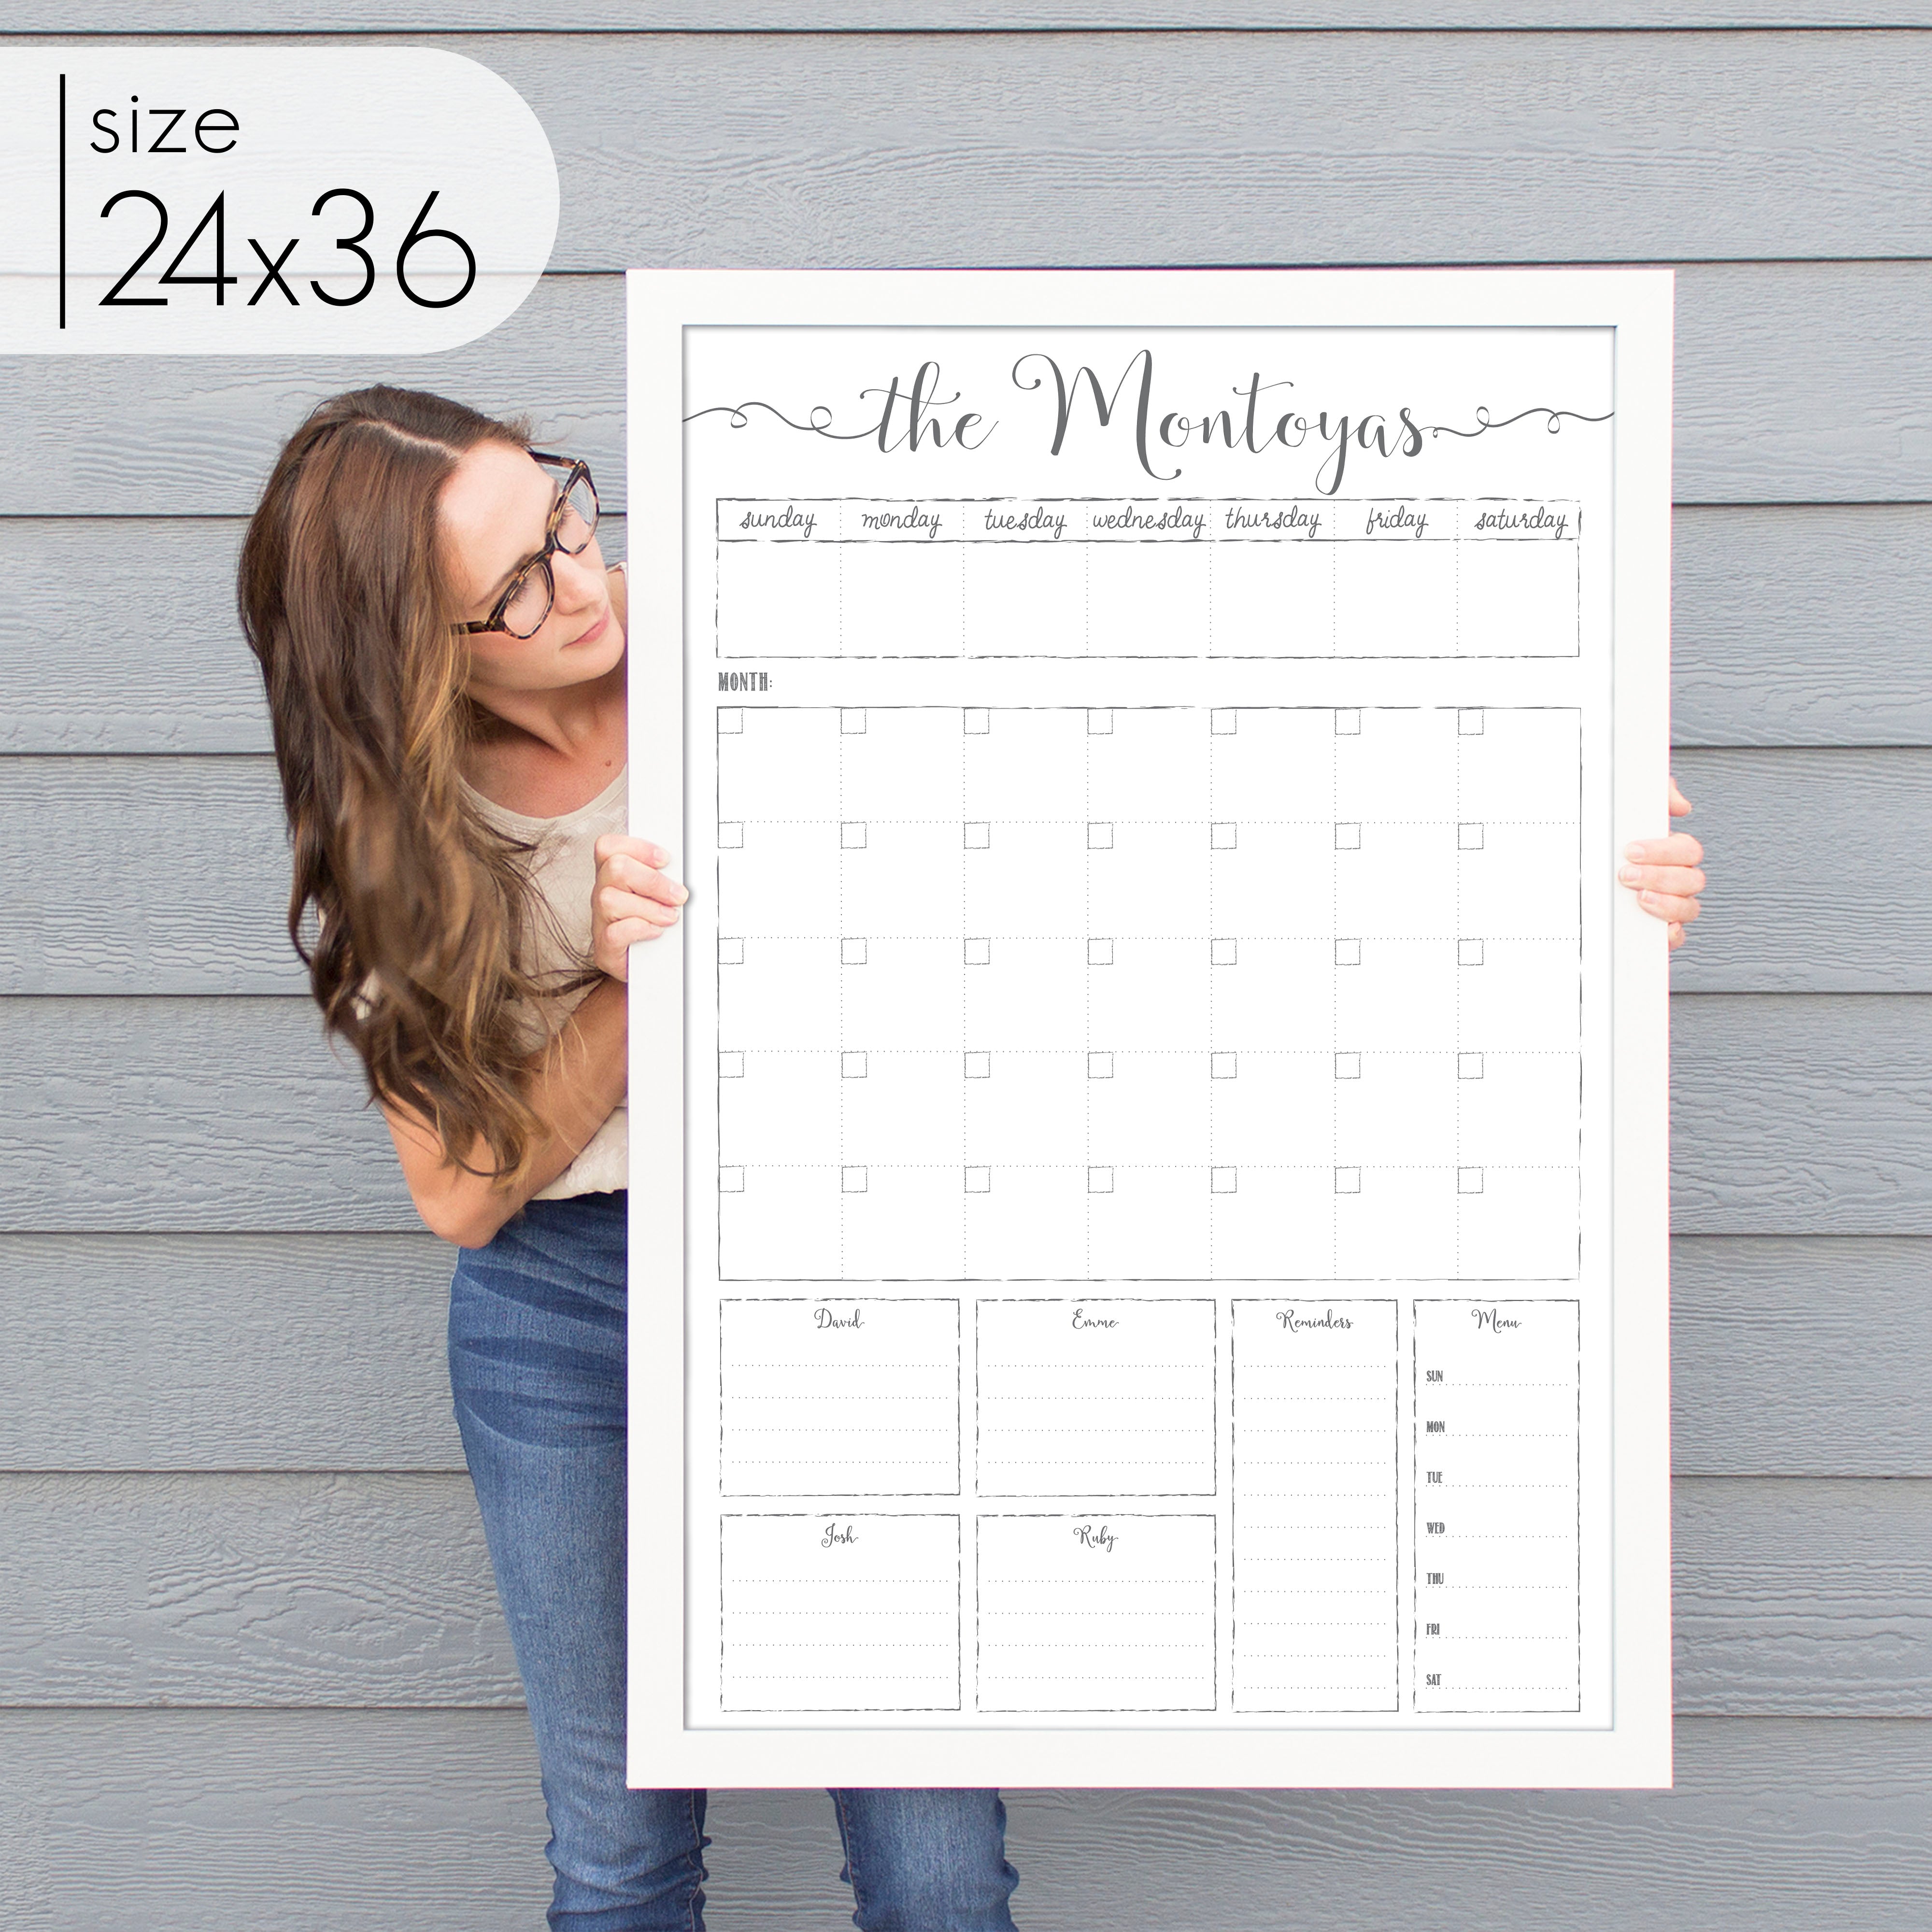 Week & Month Combo Framed Whiteboard + 6 sections | Vertical Knope